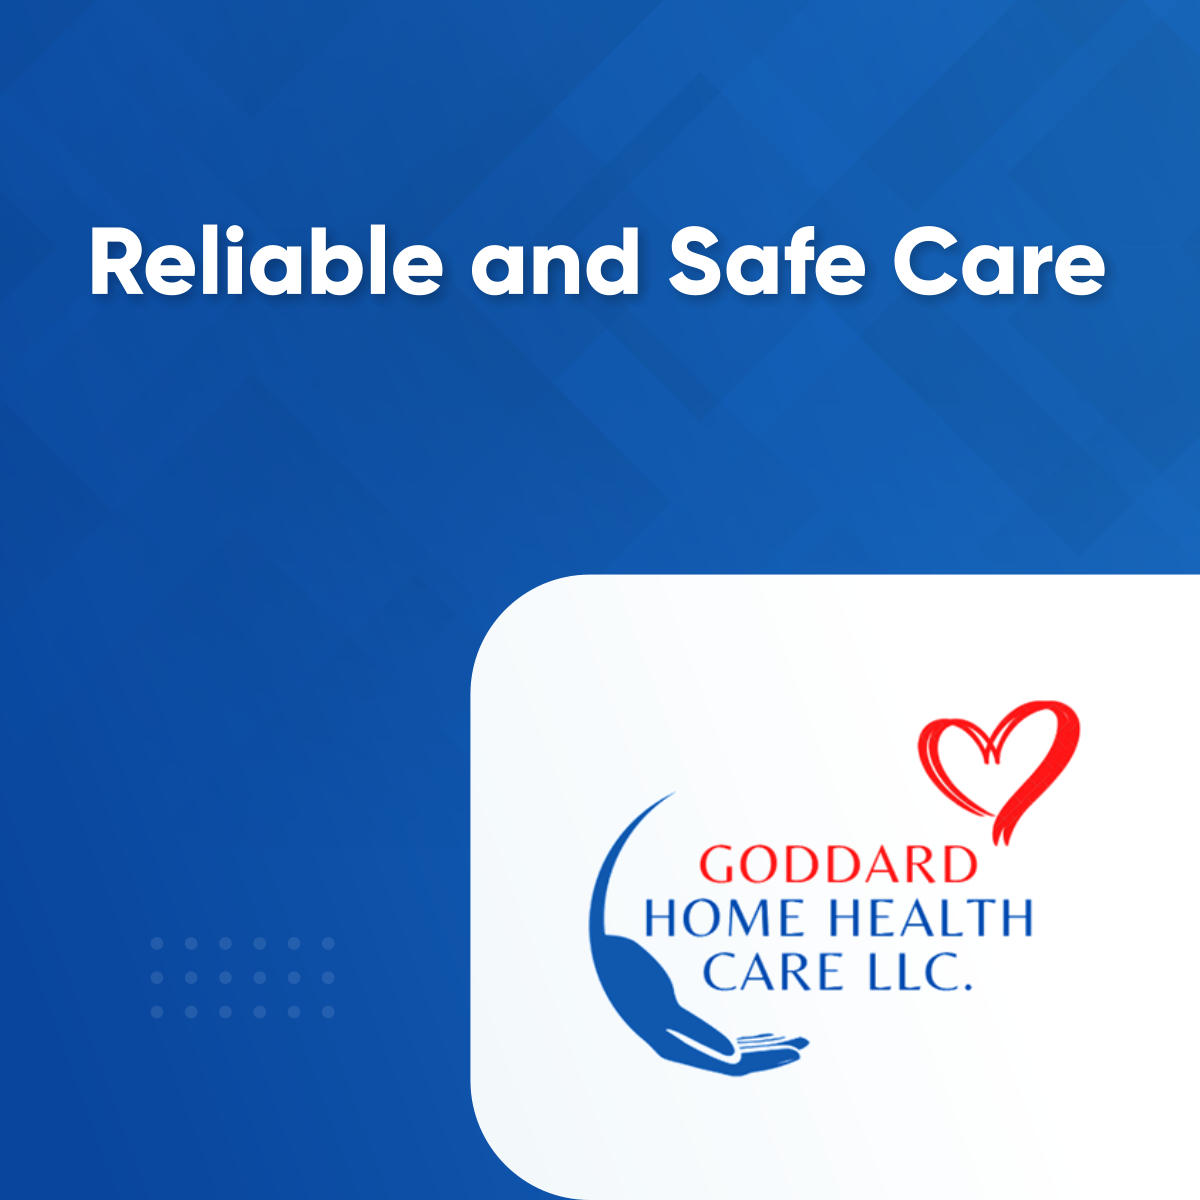 Goddard Home Health Care LLC can offer a wide range of benefits for seniors and their families. Our experienced and compassionate caregivers provide comfort, personalized care, skilled medical care, cost-effectiveness, independence, and peace of mind.

#ReliableCare #SafeCare